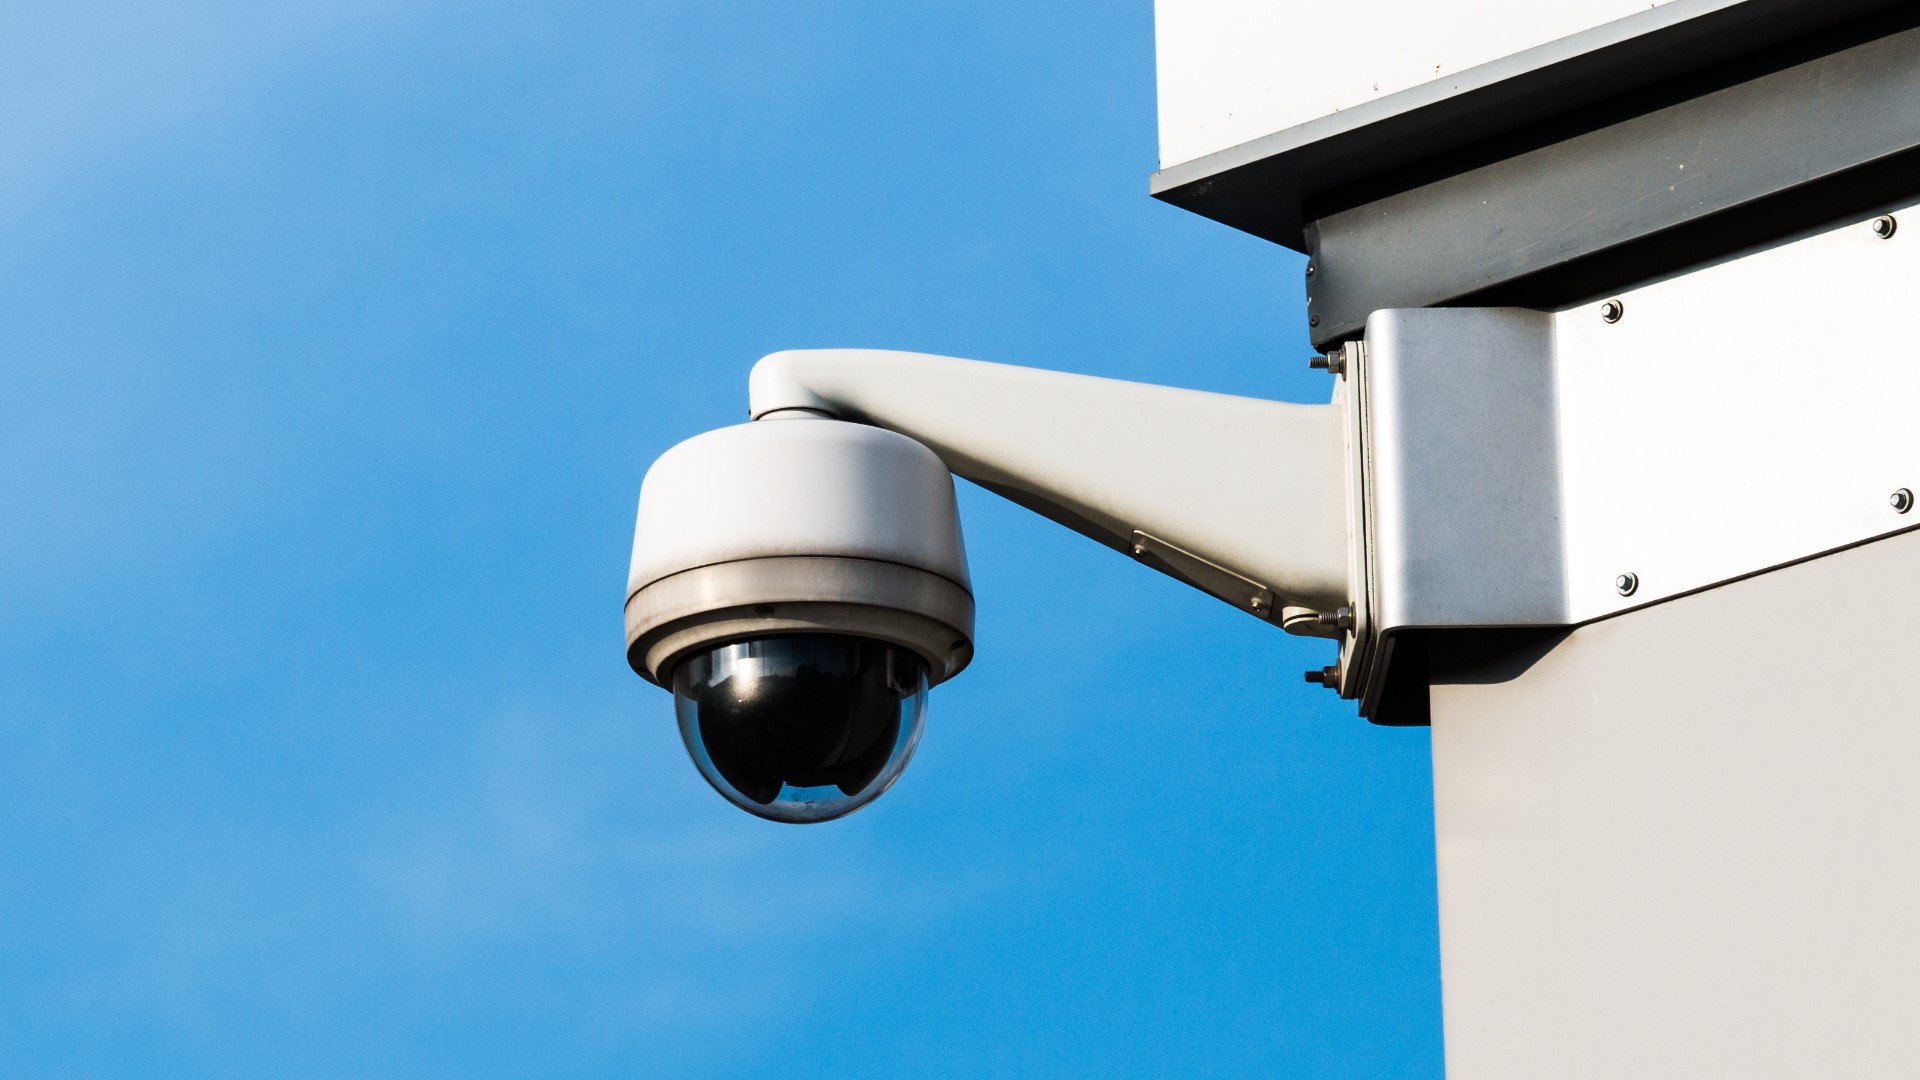 The new law gives the business owners until the end of June 2023 to buy and install high-resolution cameras.